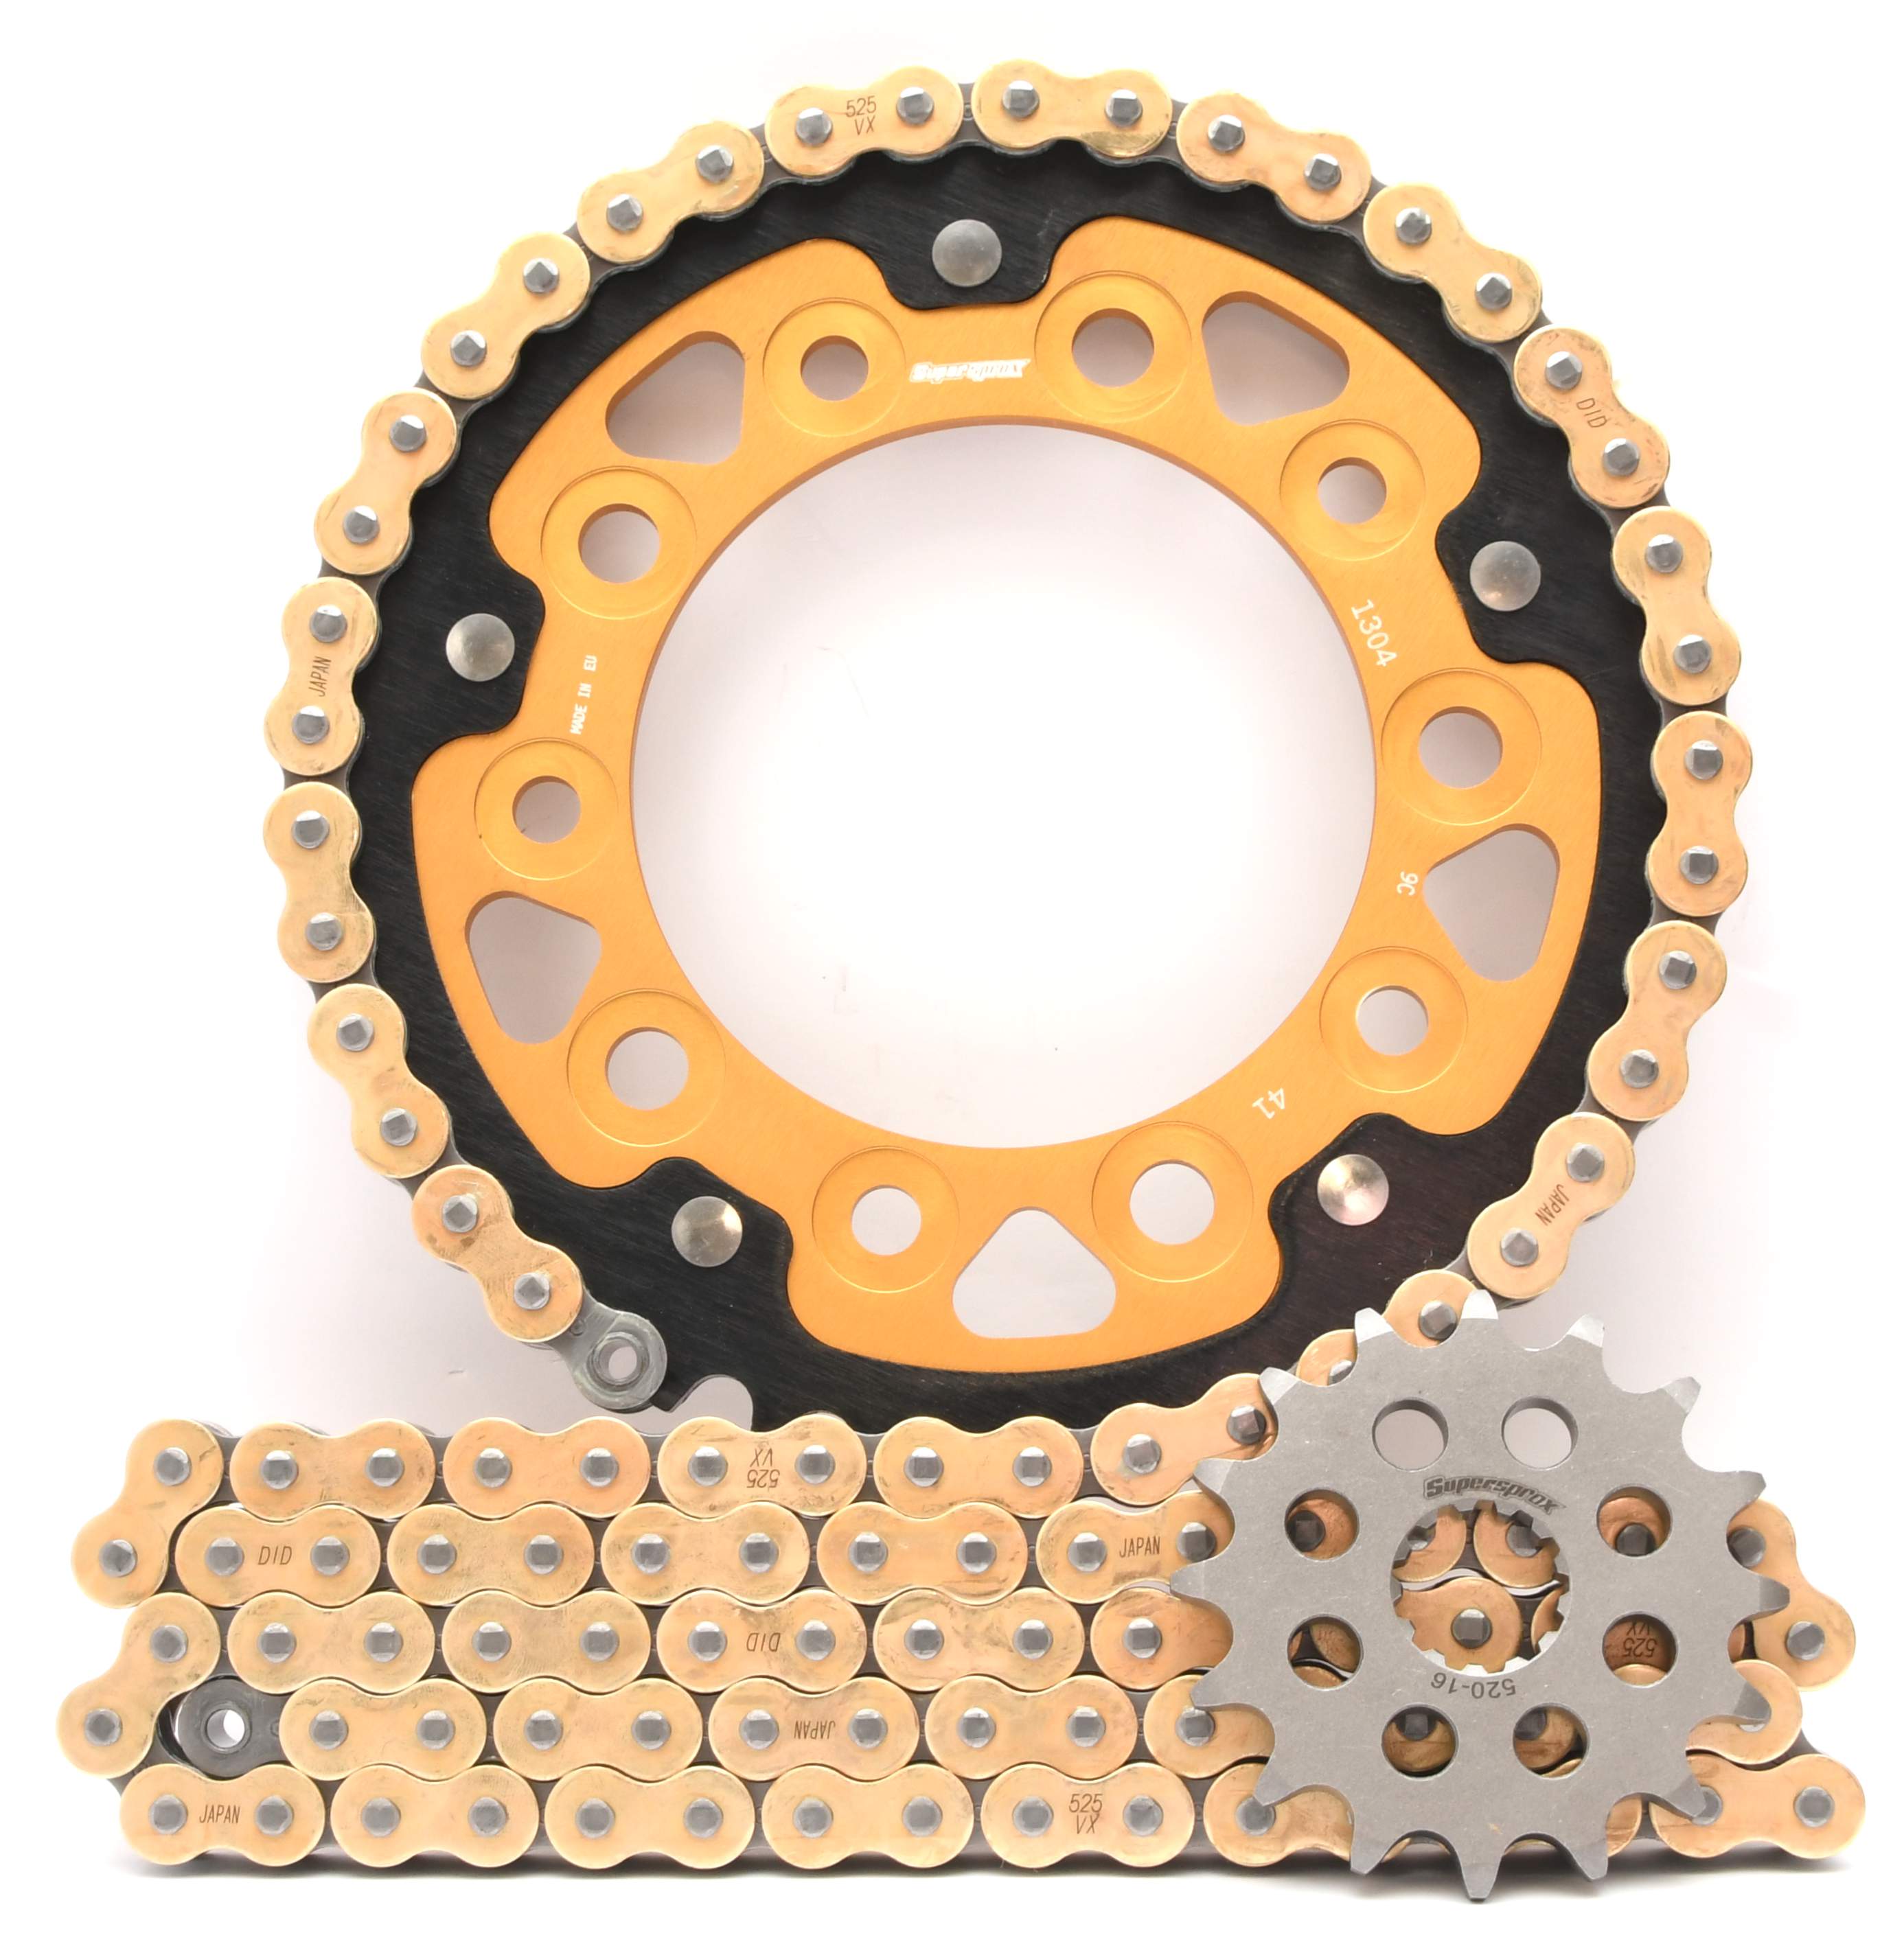 Supersprox Chain & Sprocket Kit for Honda CB 650 F/R 2014> - Standard Gearing